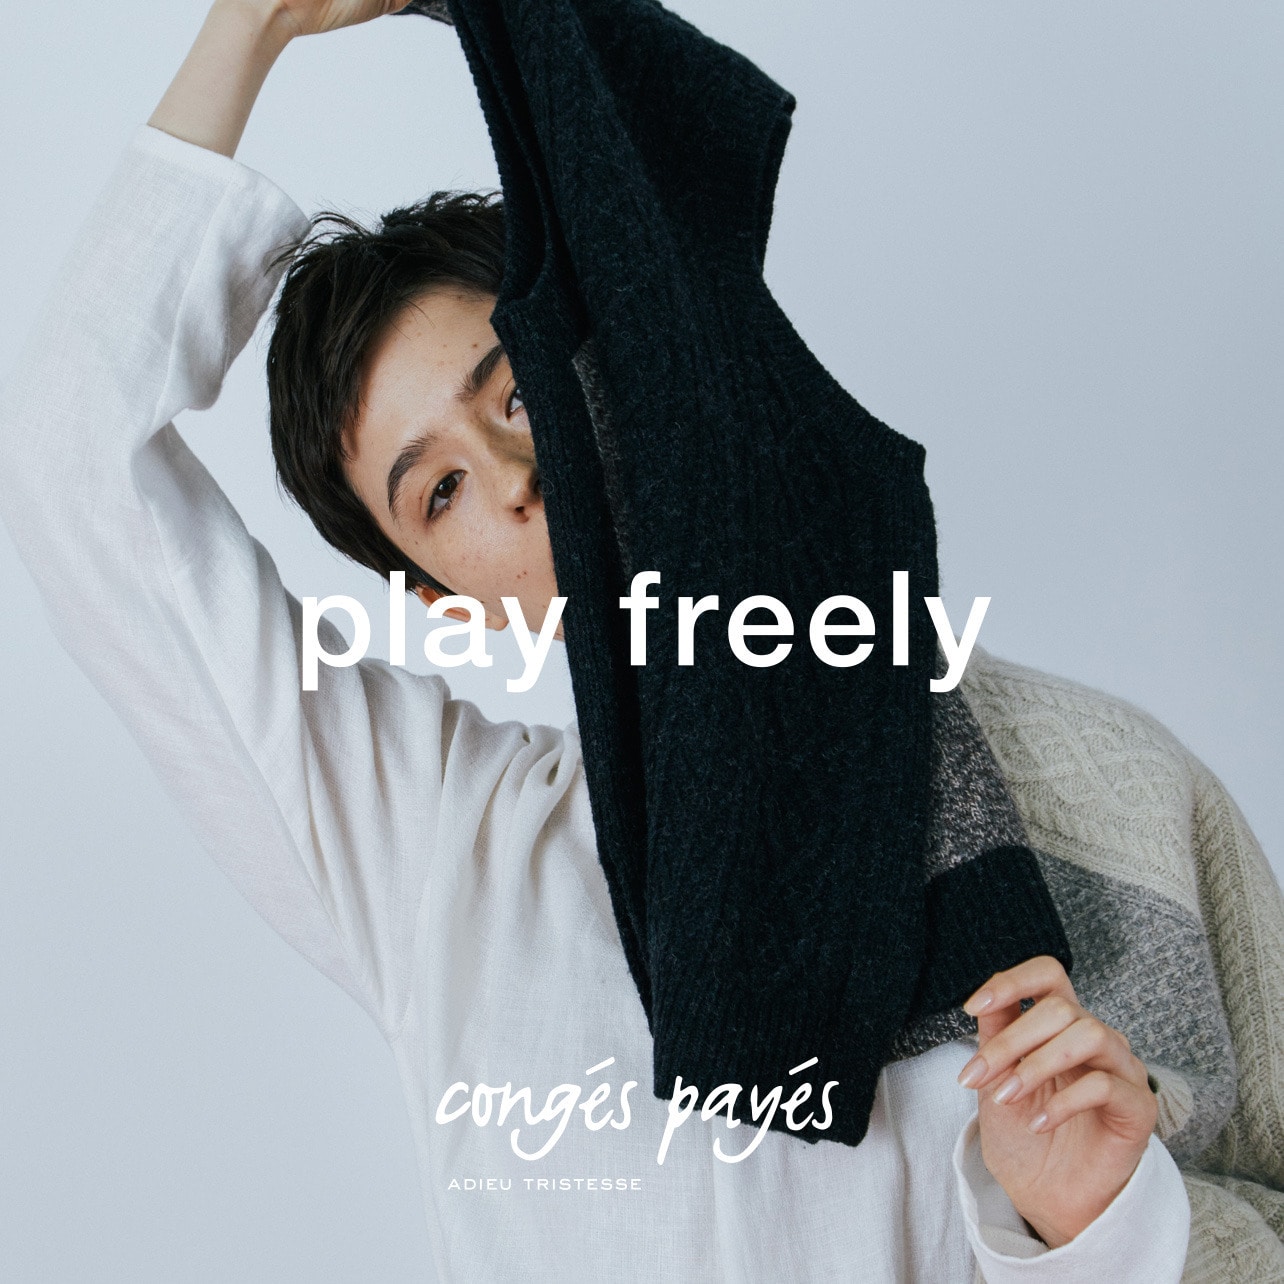 play freely					